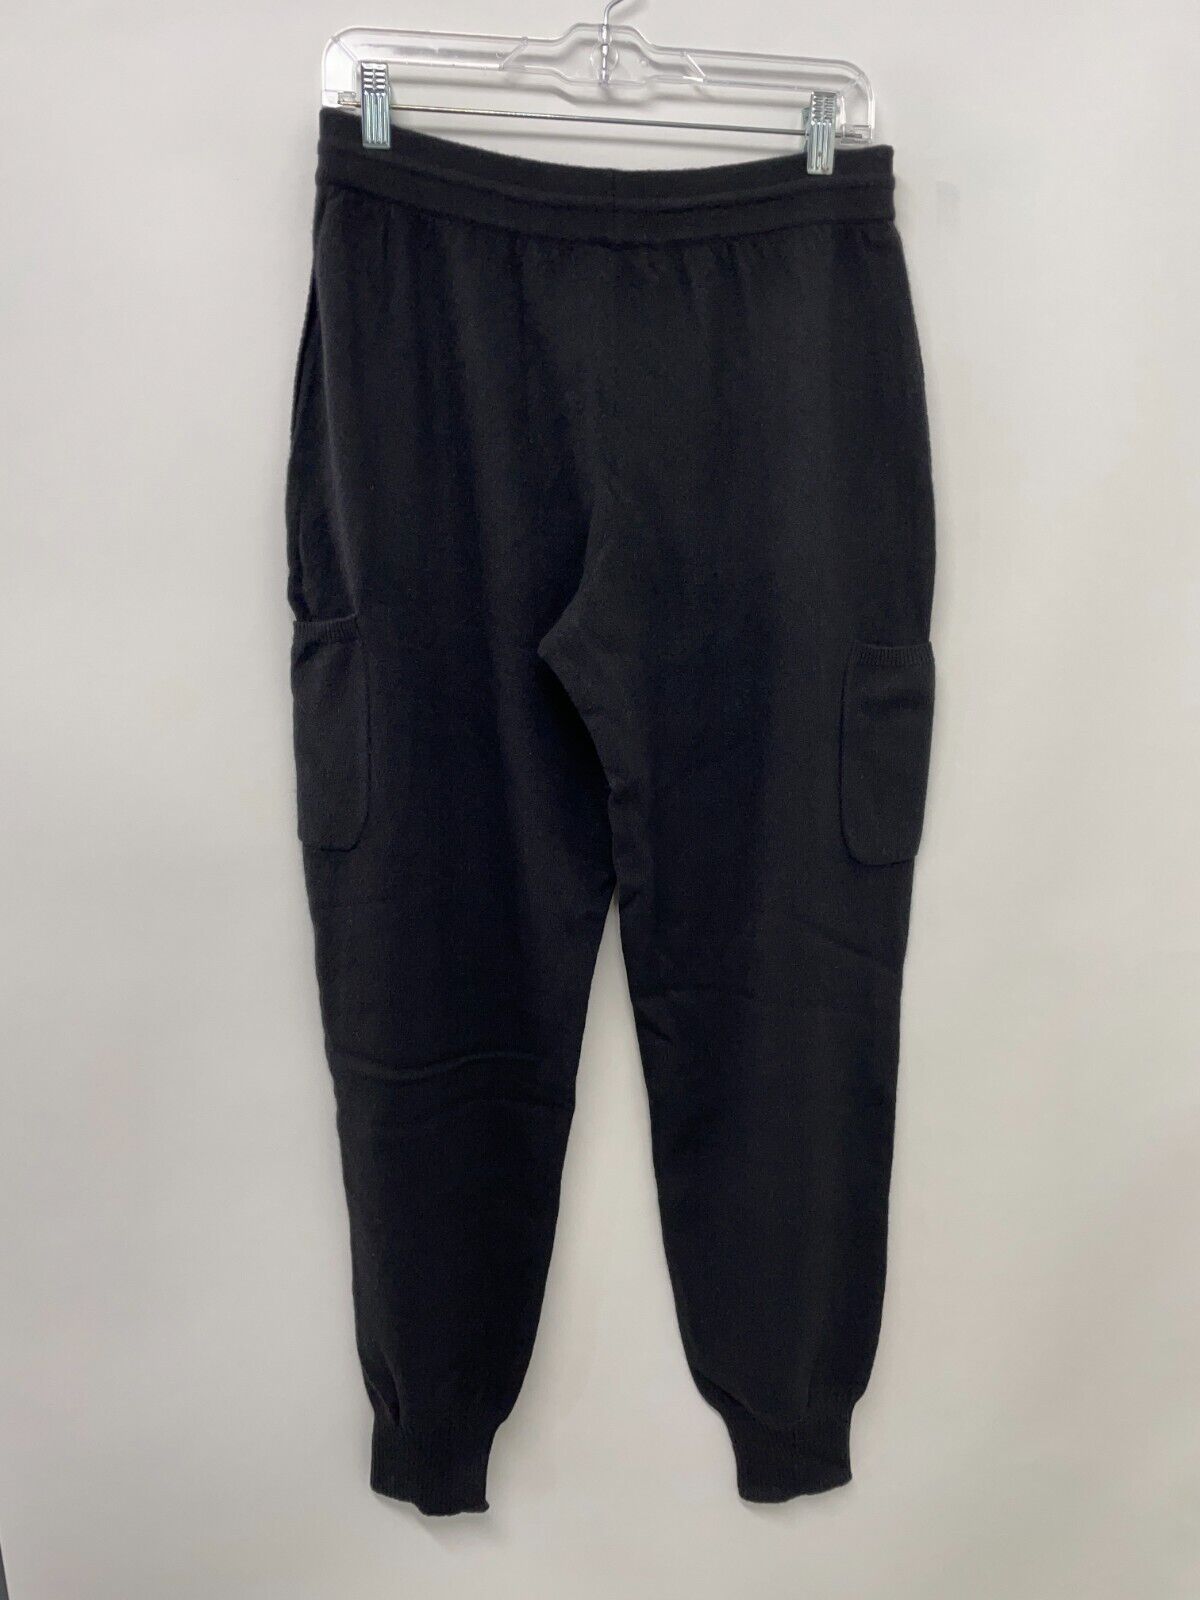 NAADAM Women's M Cashmere Cargo Joggers Black Relaxed Fit Pockets WE02106 NWT